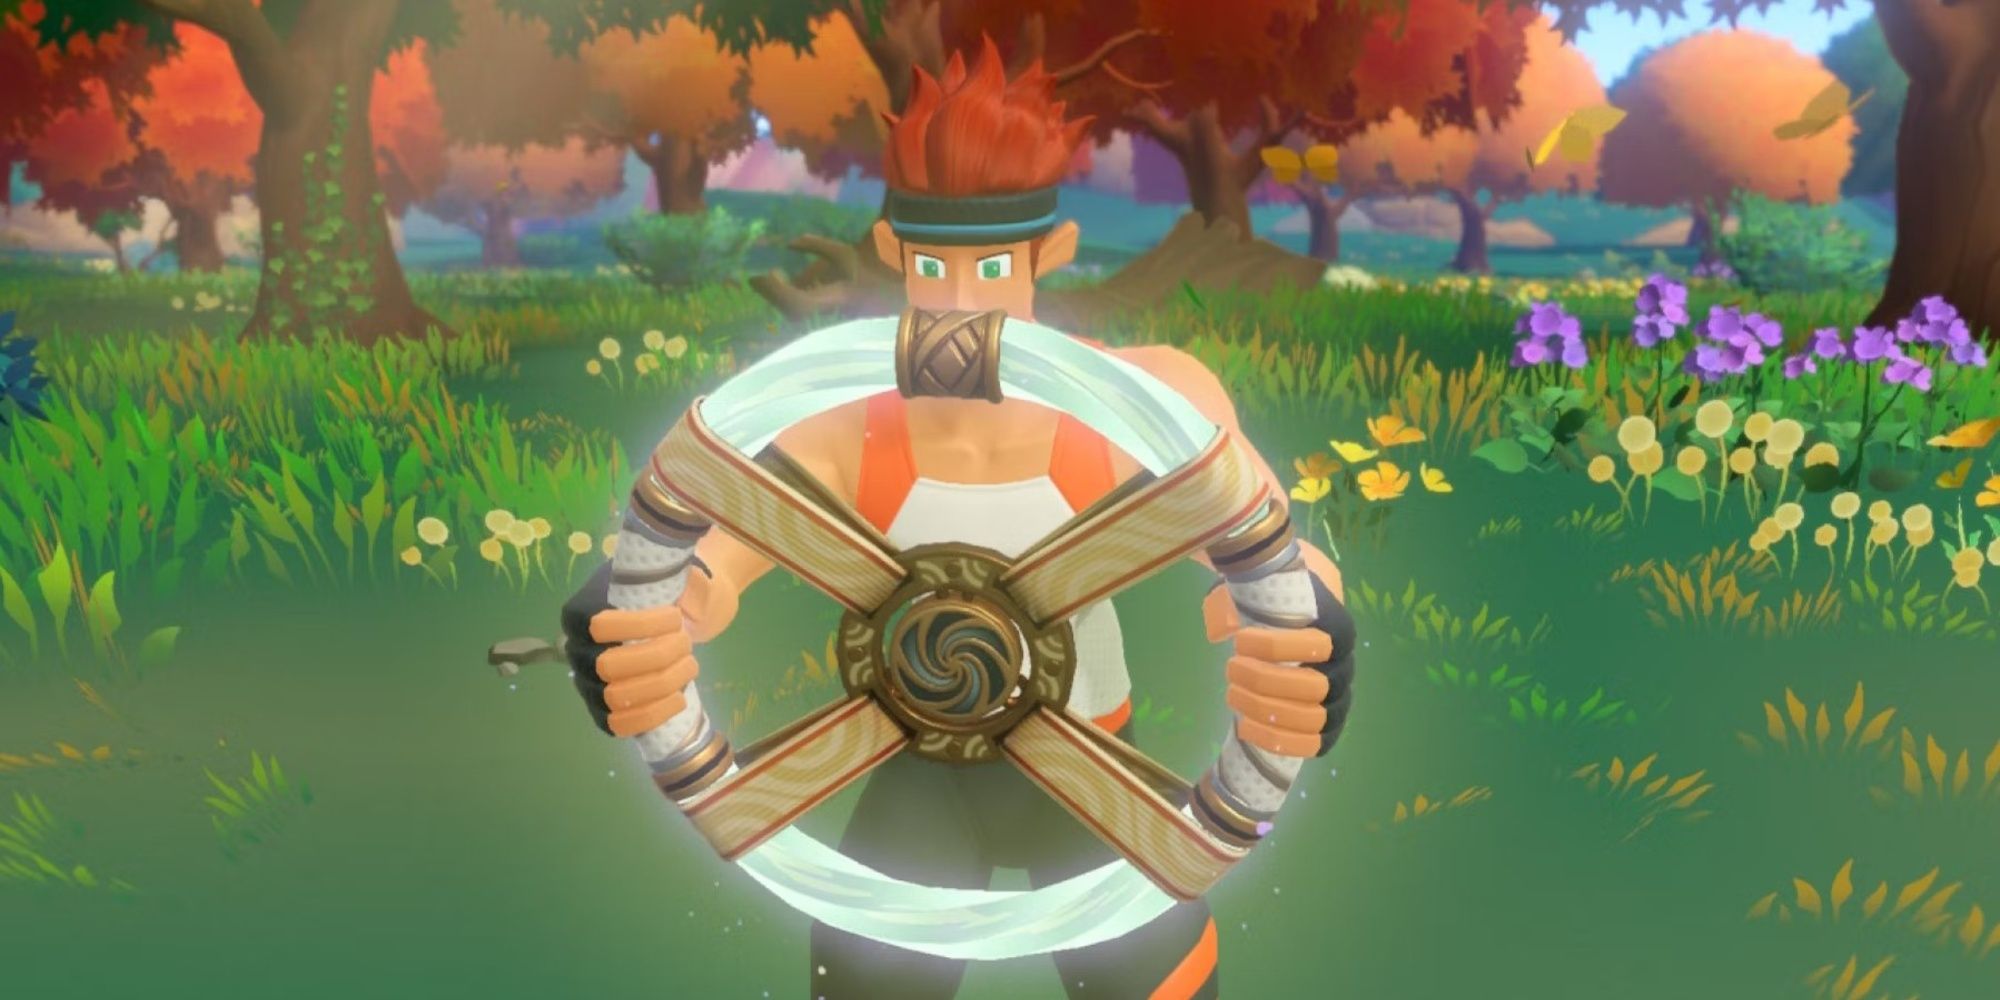 character holding the ring in ring fit adventure